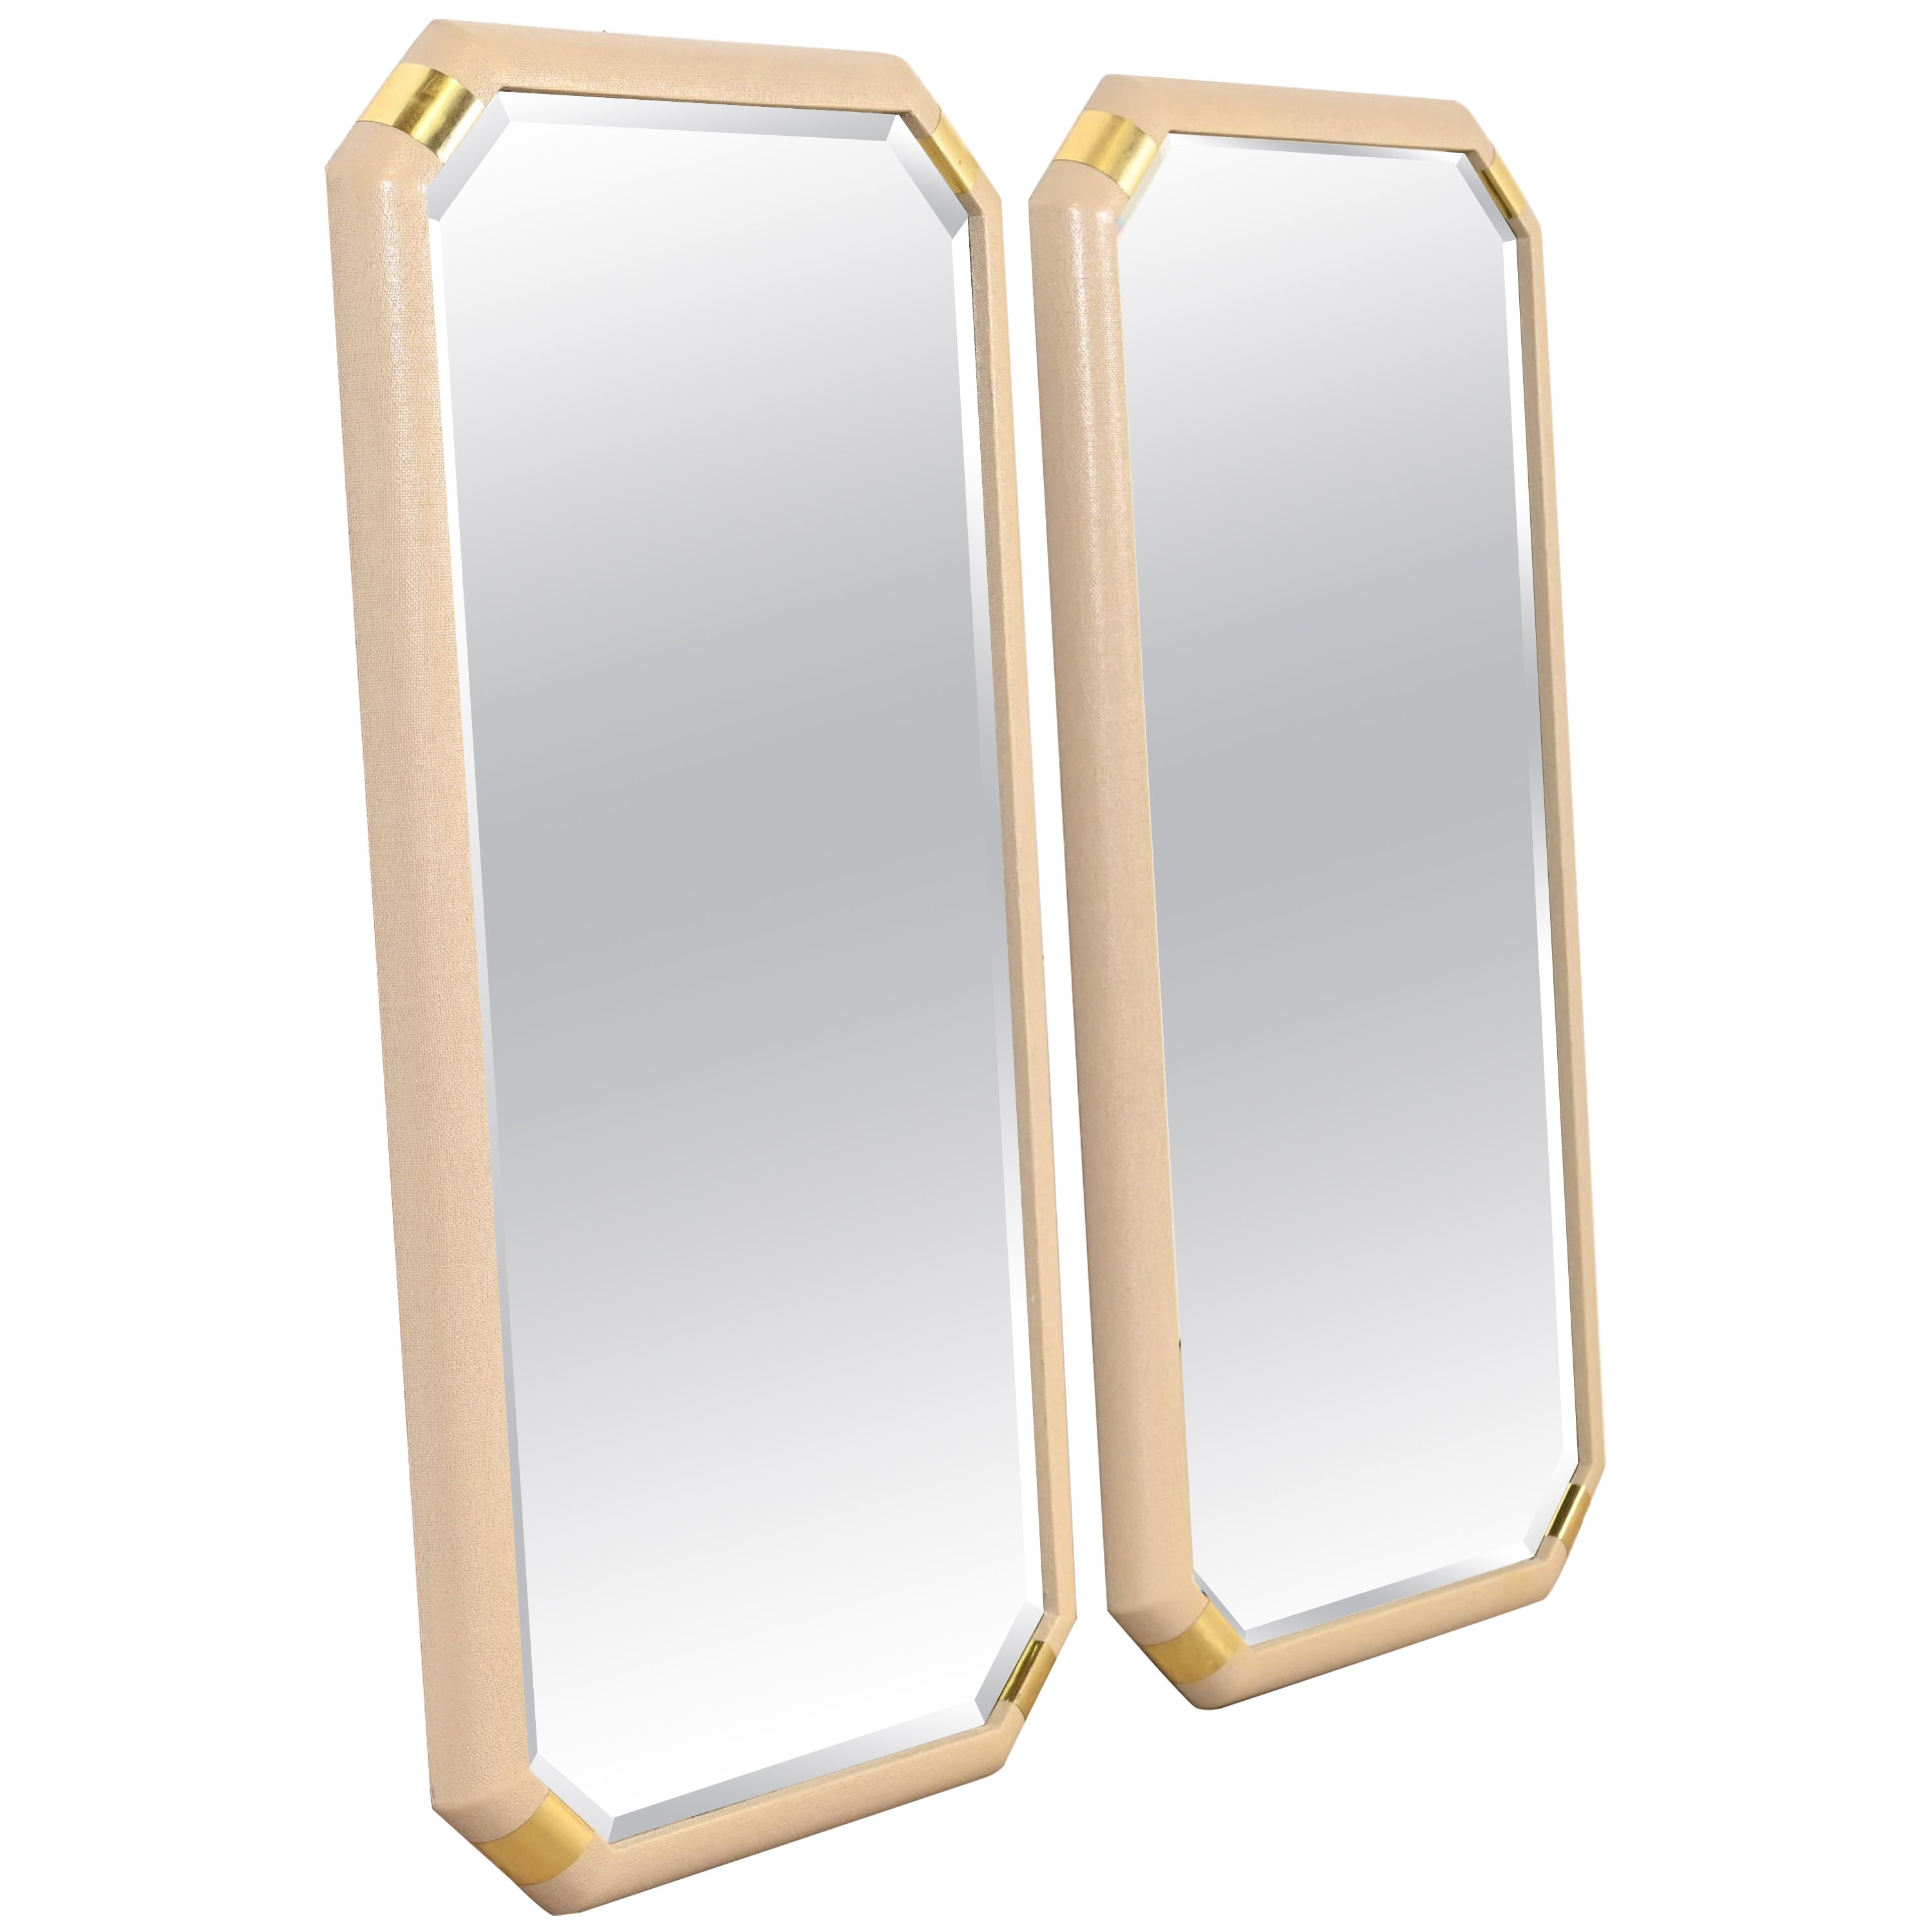 Romweber Hollywood Regency Lacquered Grasscloth and Brass Wall Mirrors, Pair